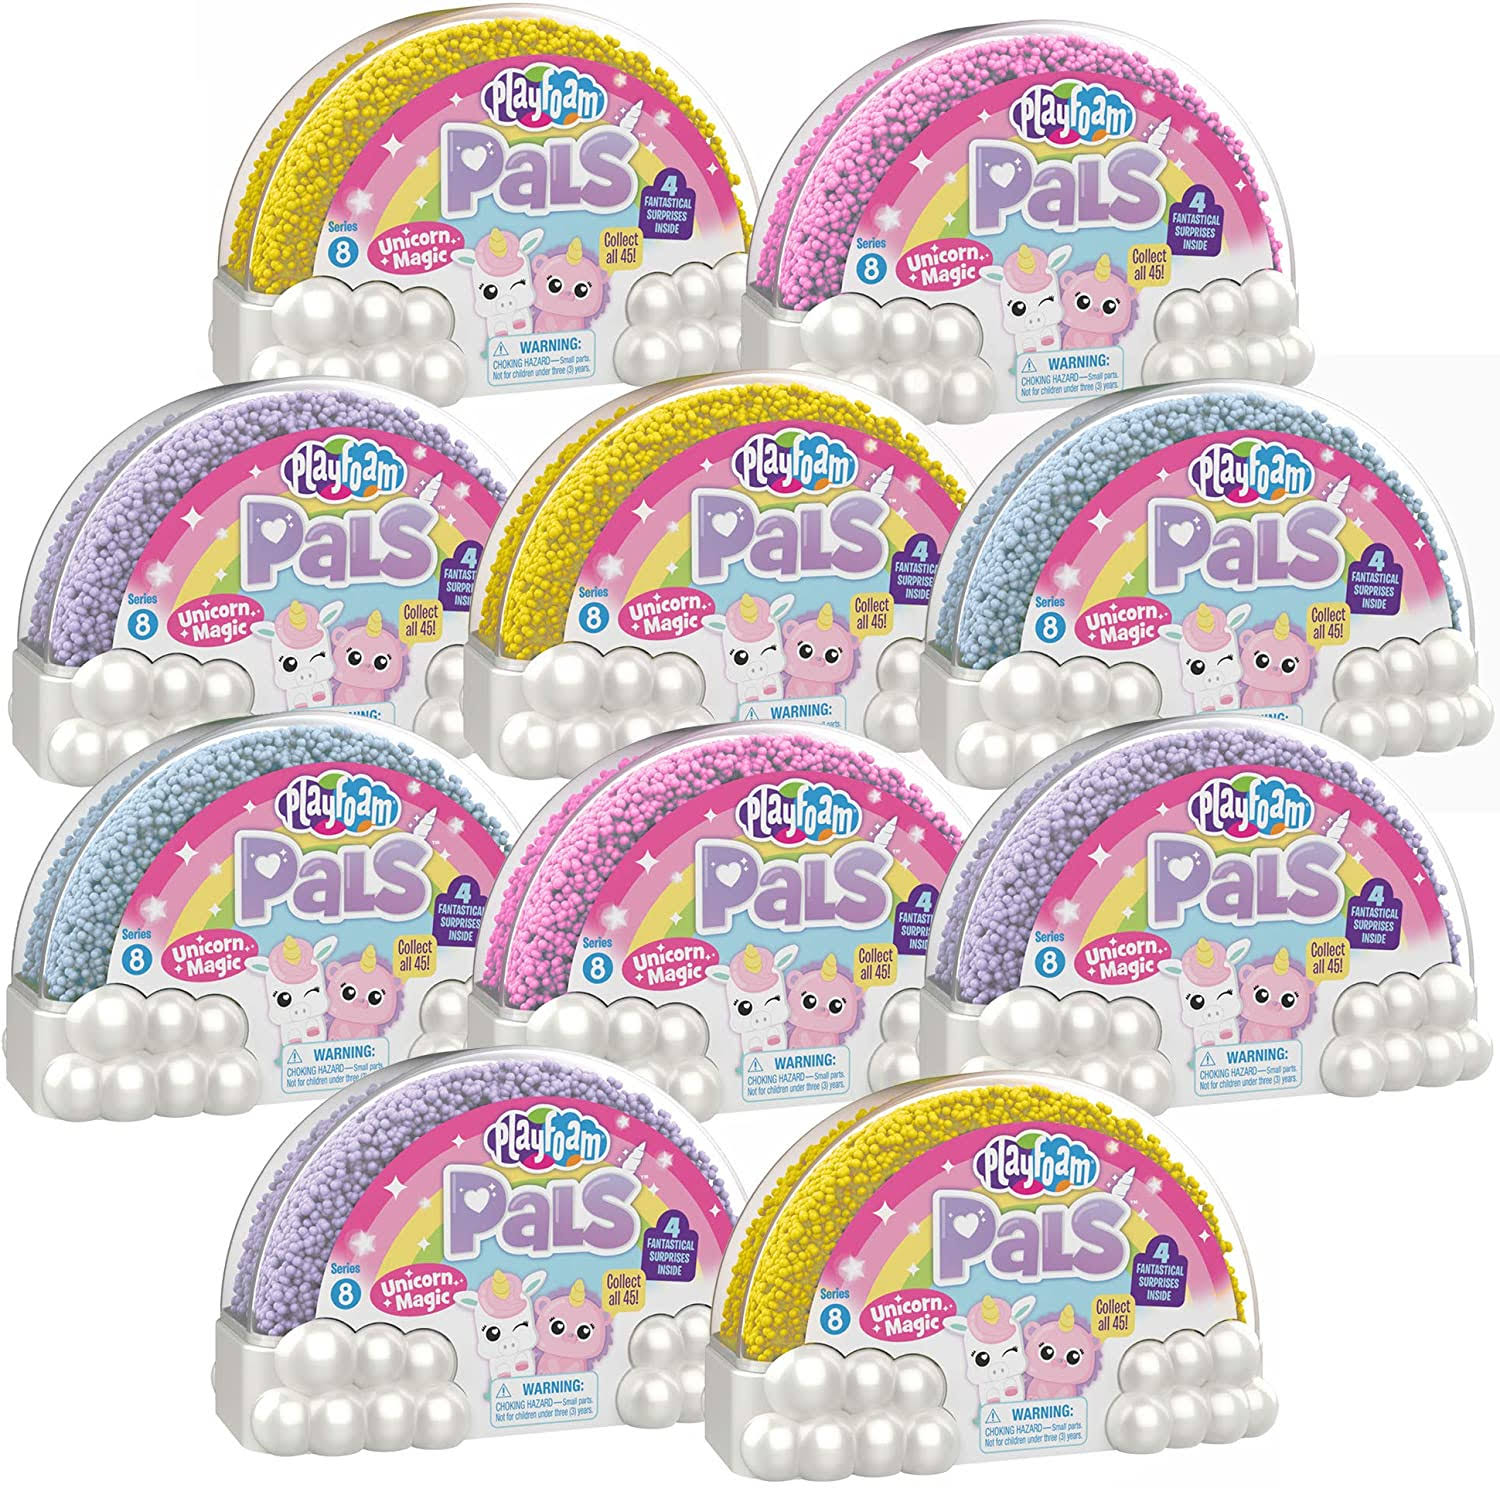 Learning Resources Playfoam Pals - Unicorn Magic, Assorted